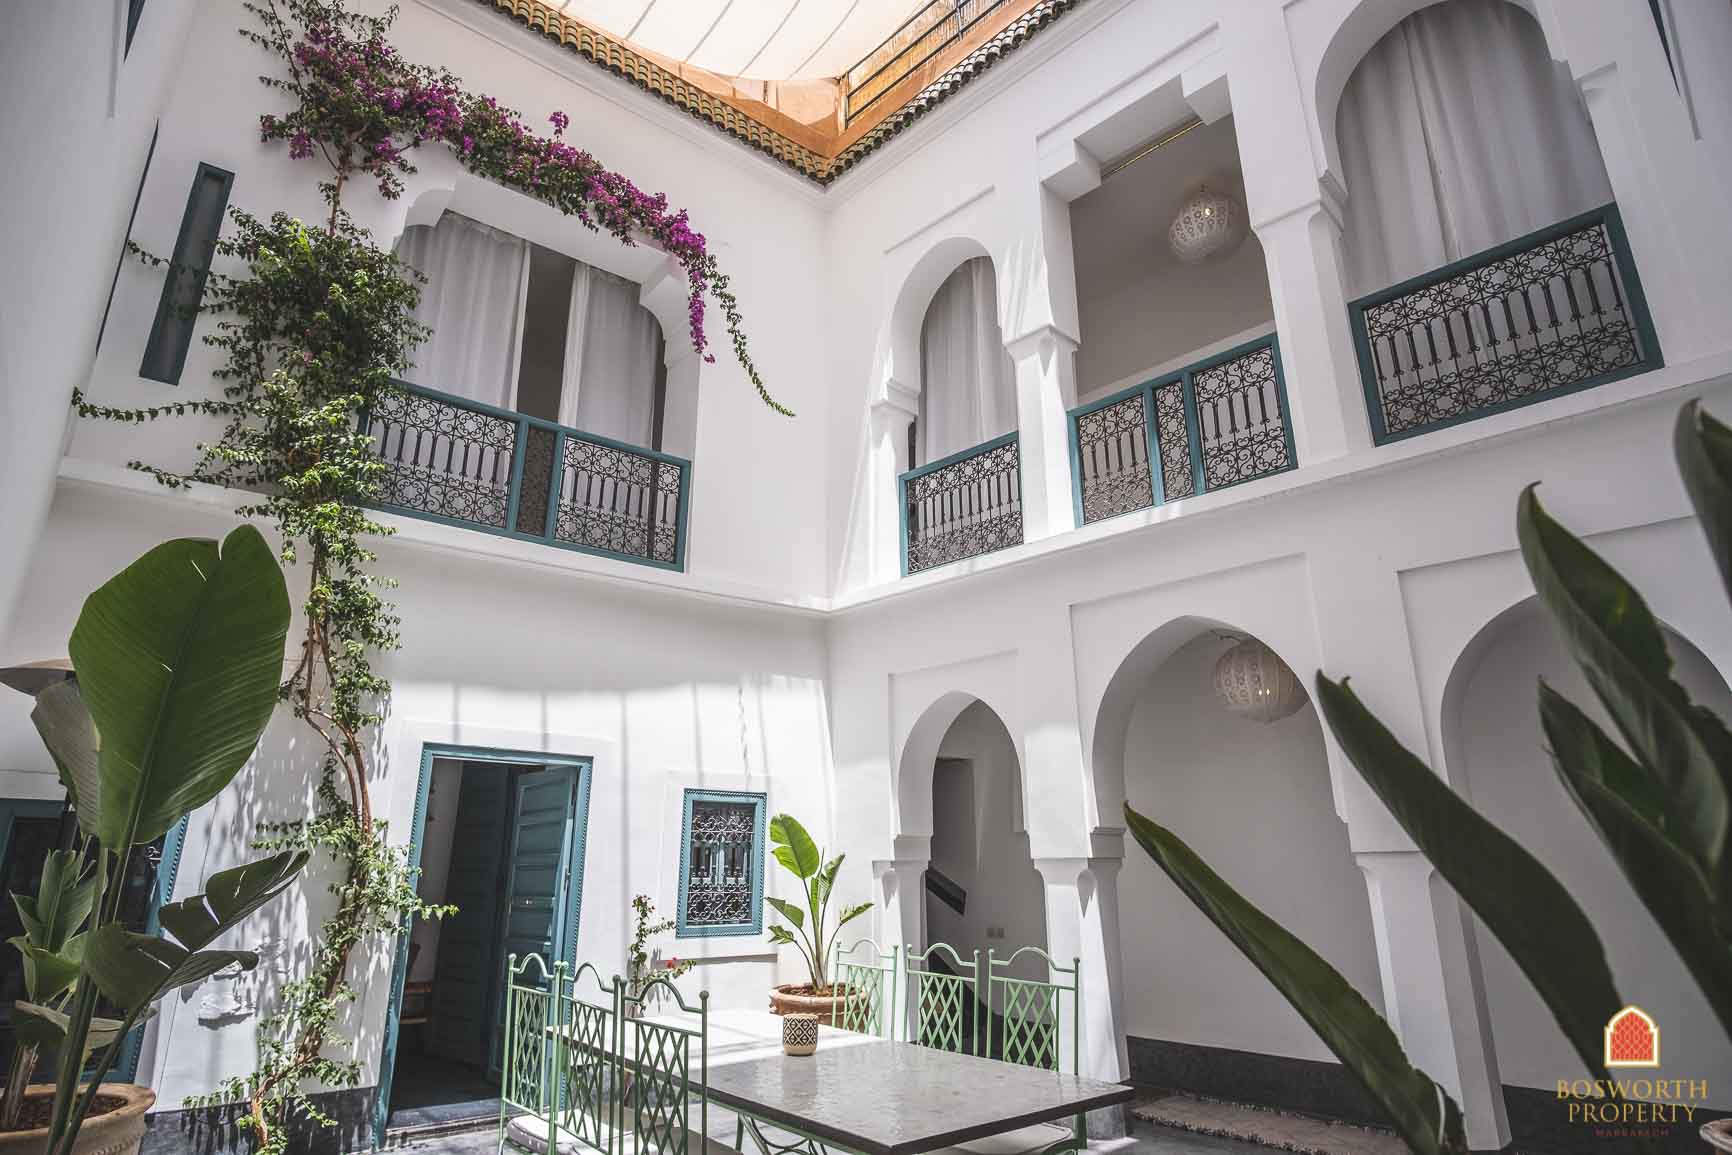 Perfect Pied a Terre Riad For Sale Marrakech-Riads For Sale Marrakech-marrakech real Estate-immobilier marrakech-riads a vendre marrakech